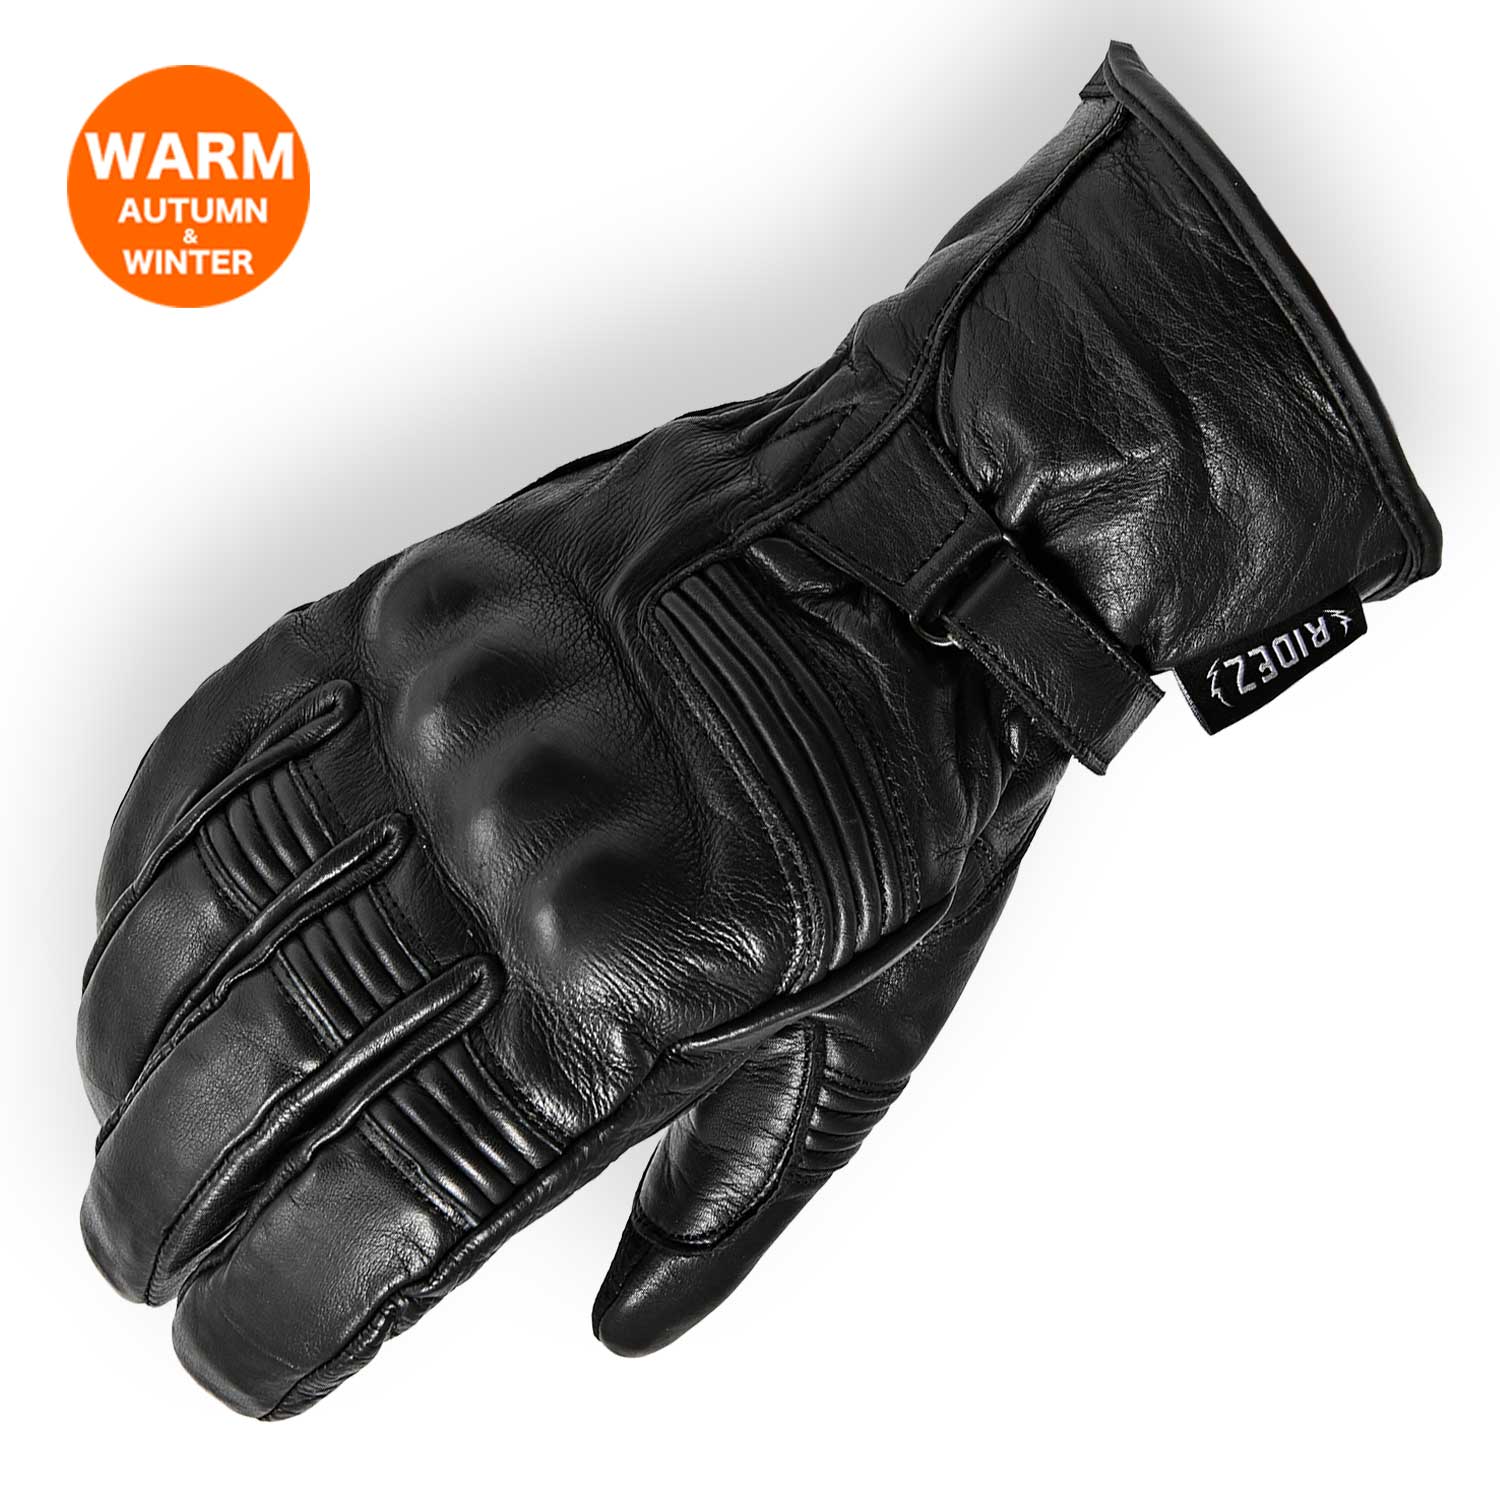 RIDEZ HECTOR GLOVES Motorcycle Leather Gloves BLACK RWG09